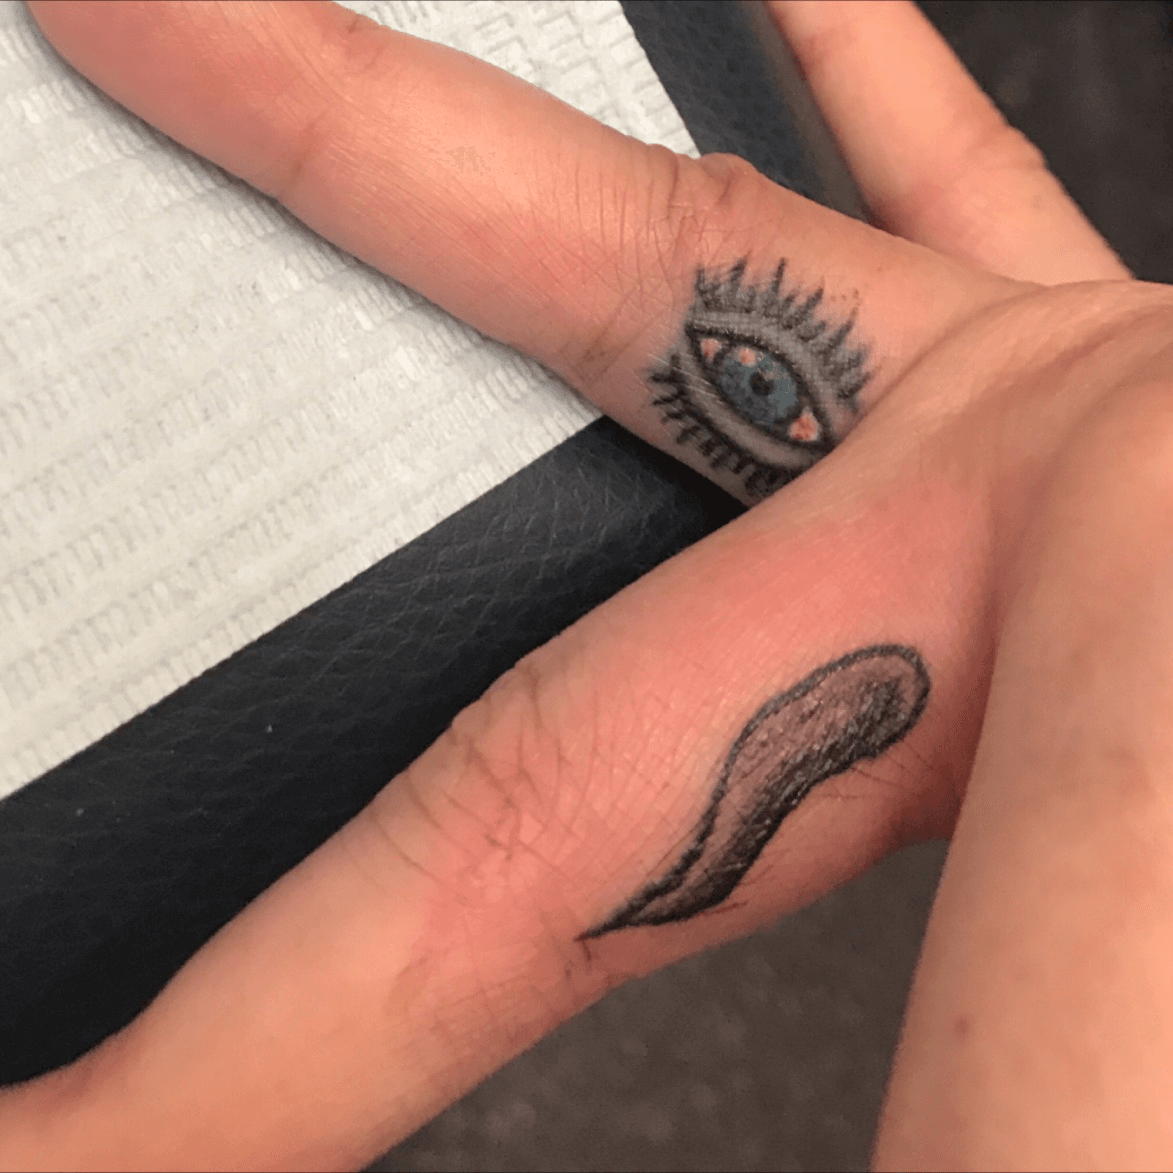 If you want and evil eye tattoo going simple can give you more